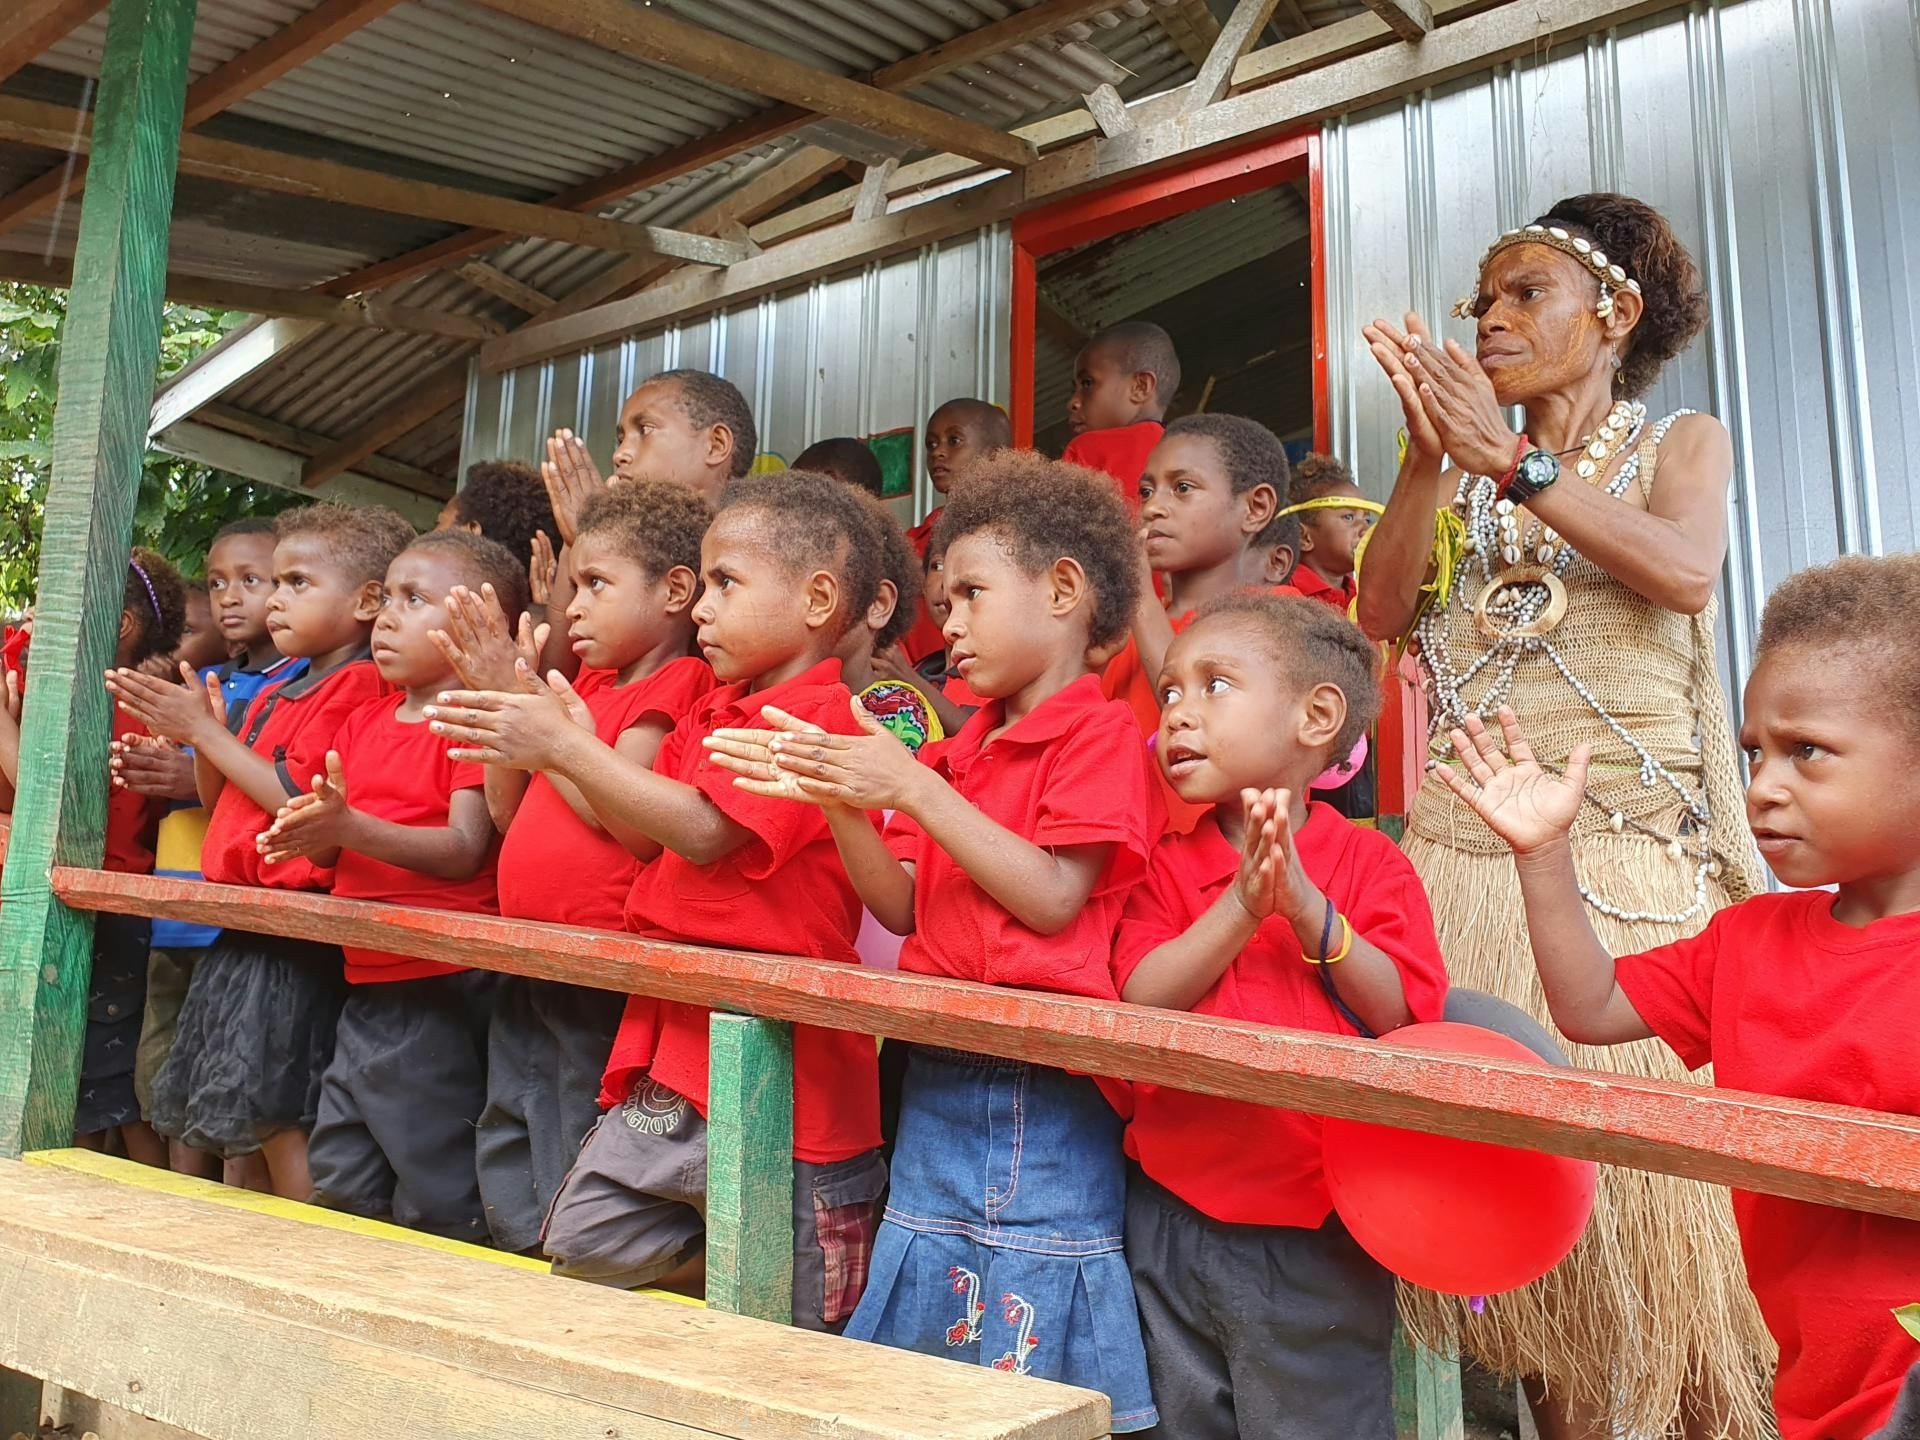 Preschool children in Hobu early childhood centre demonstrate the handwashing song they learn in class.